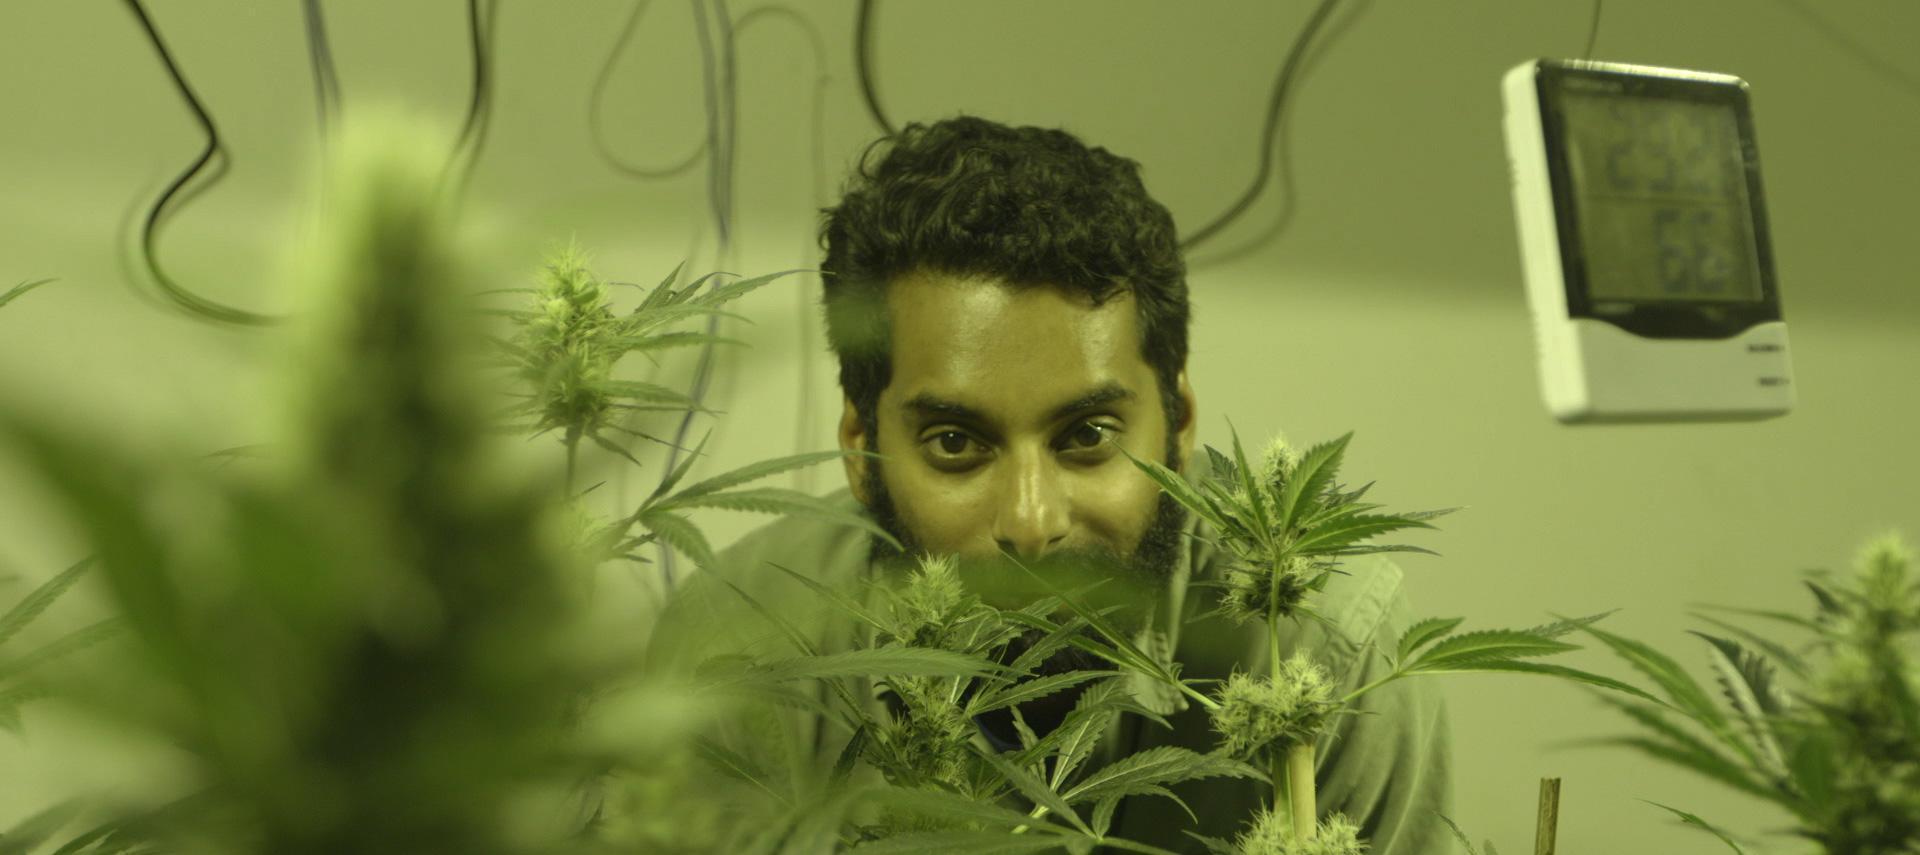 Check Out The Trailer For Viceland's New Show 'Weediquette'